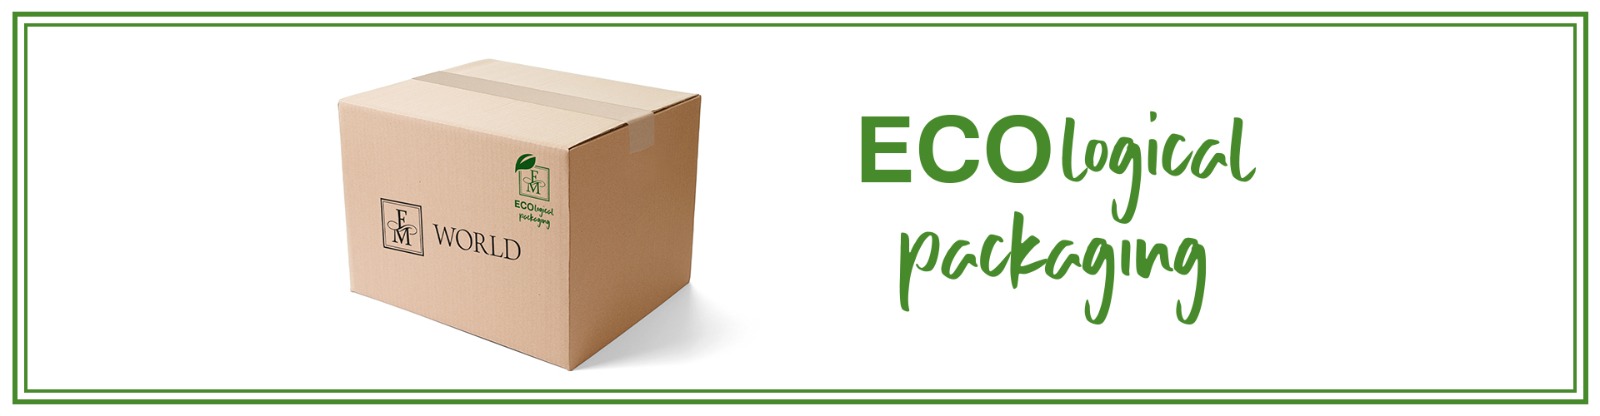 ECOlogical packaging